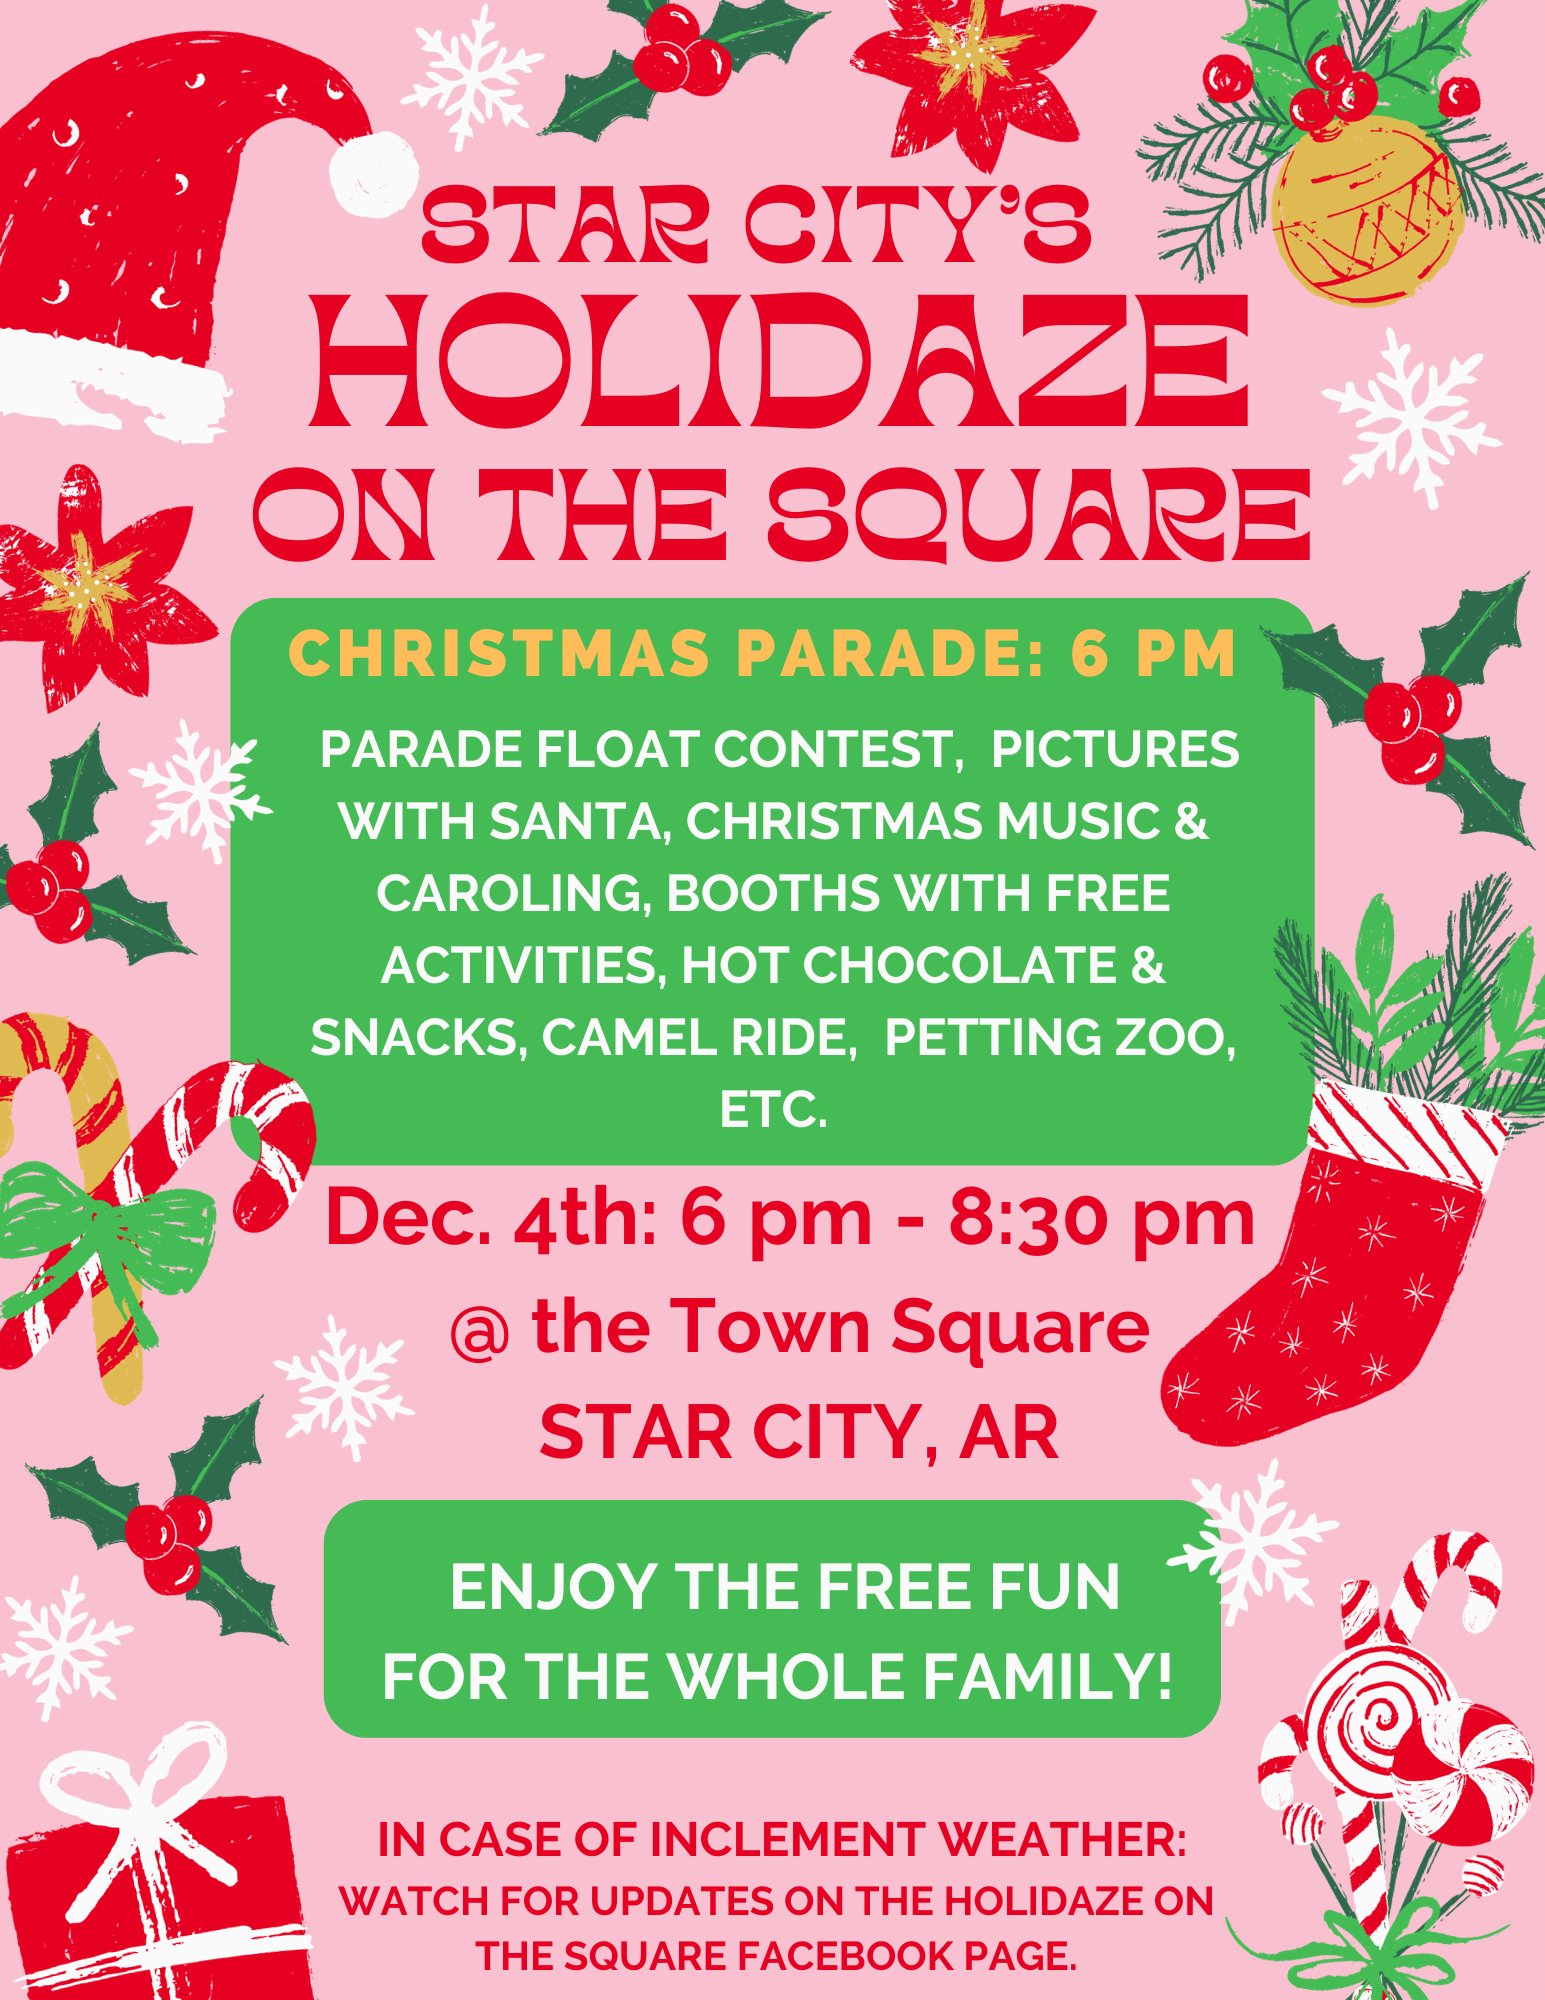 HoliDaze on the Square Ad with pink and red Christmas decor.